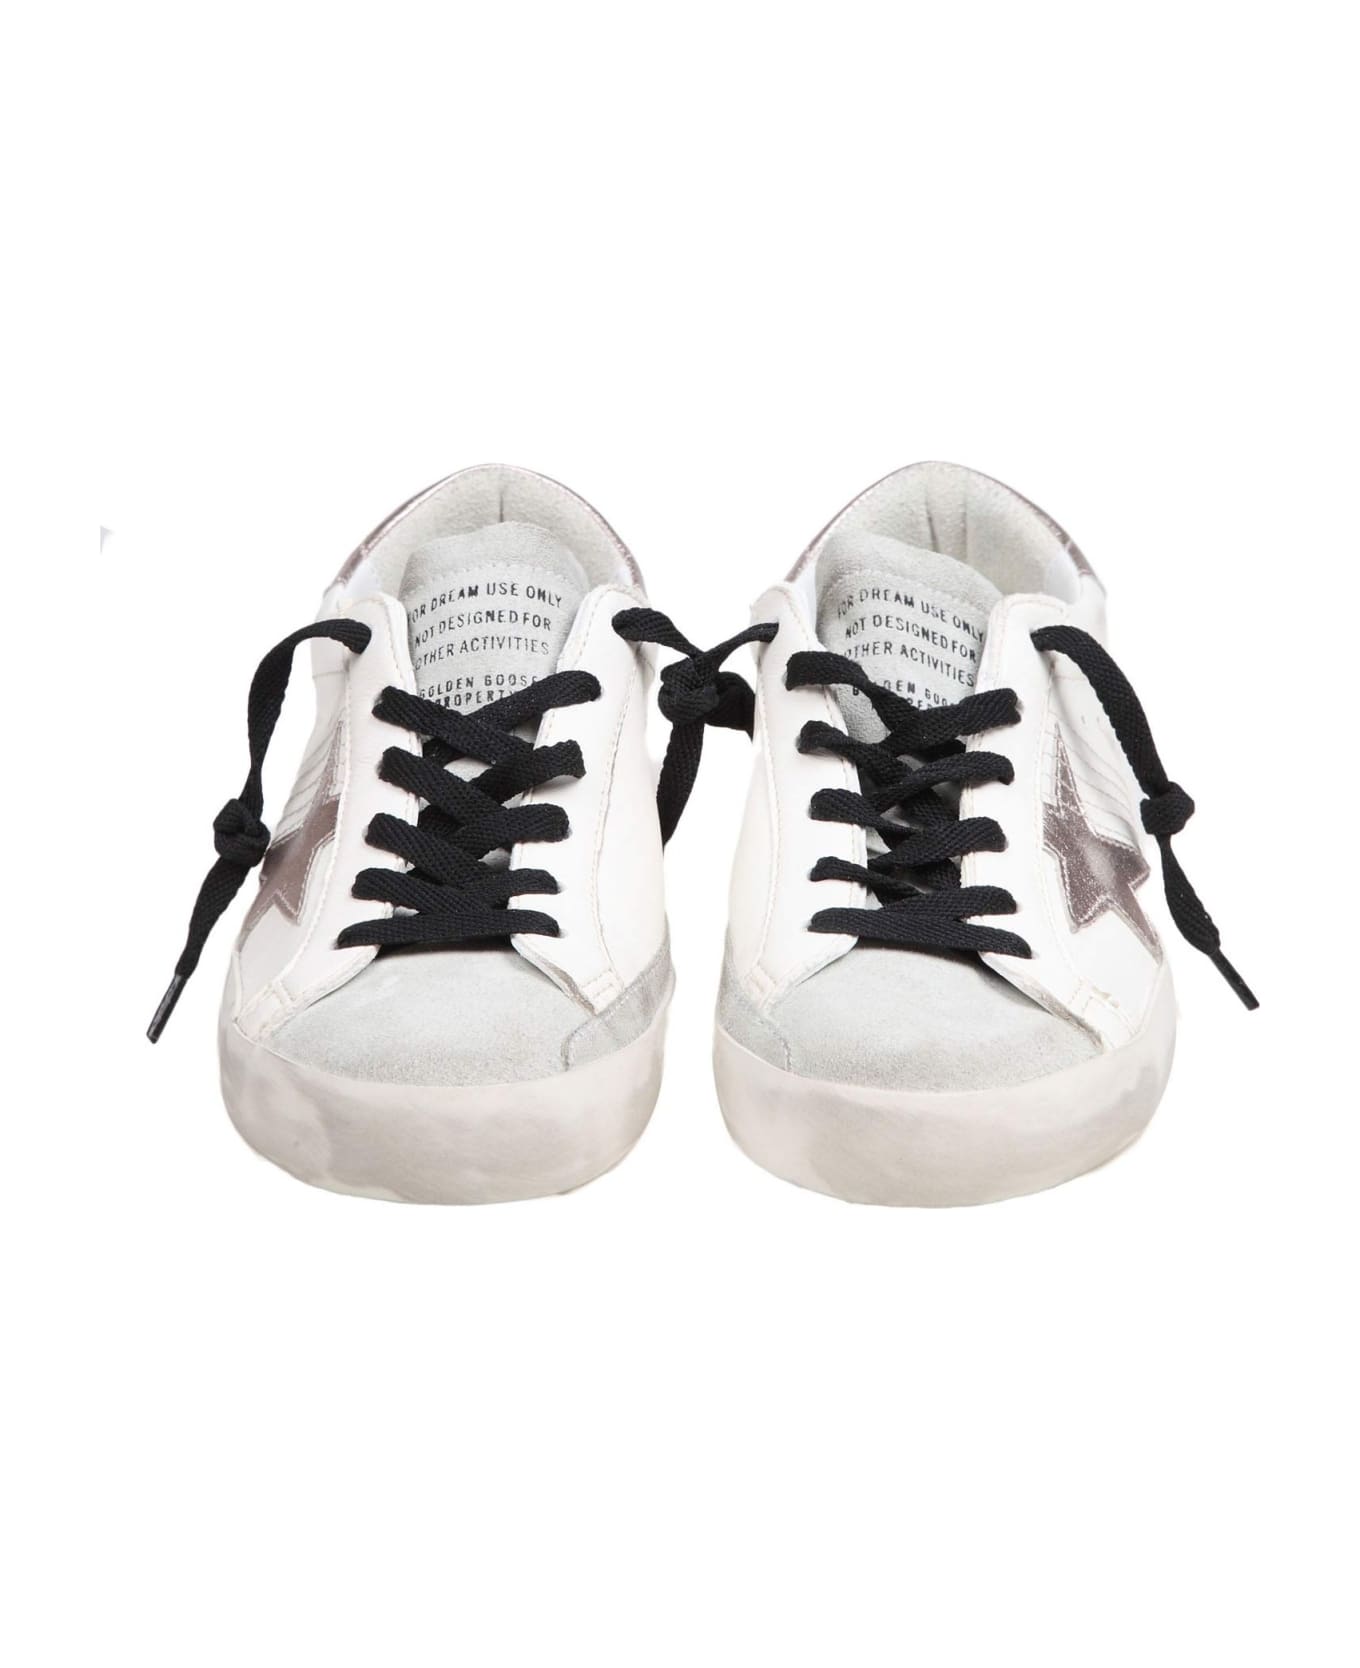 Golden Goose Super-star Sneakers In White/quartz Leather And Suede - WHITE/ICE